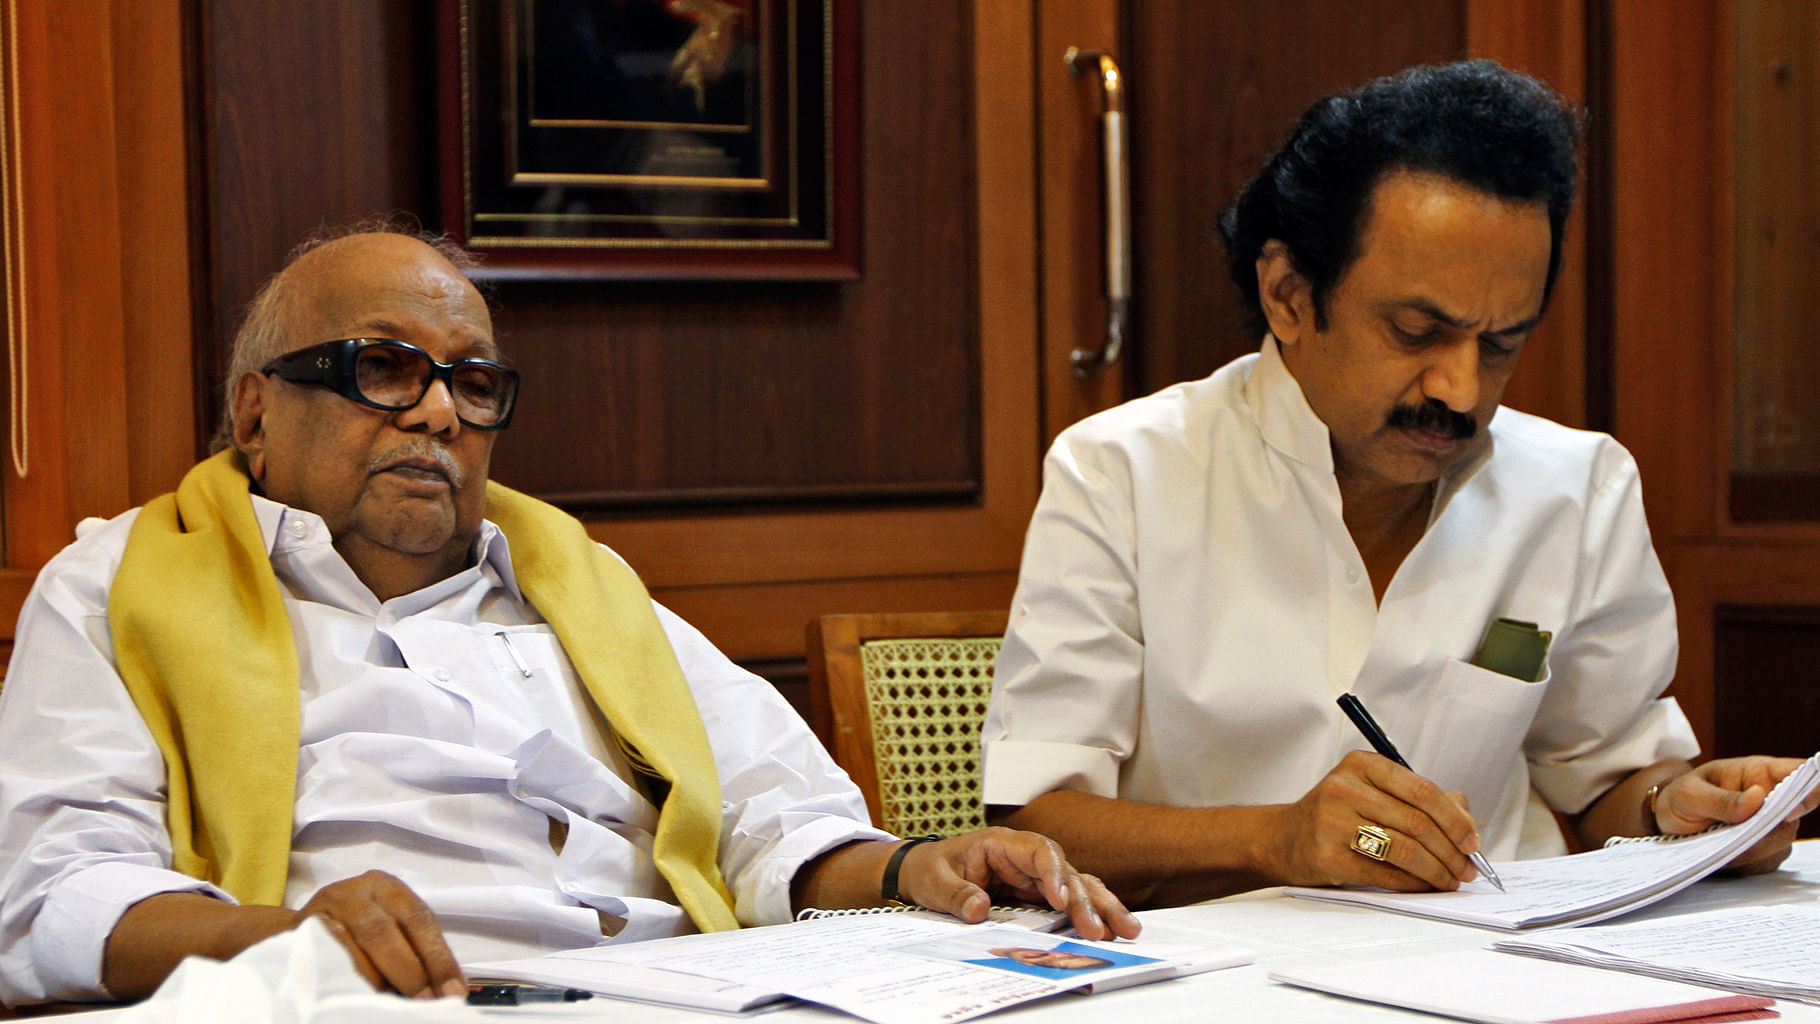 M. Karunanidhi (L)former Chief Minister of Tamil Nadu and leader of Dravida Munnetra Kazhagam (DMK) party attends a meeting besides his son M.K. Stalin, a DMK leader. (Photo: Reuters)